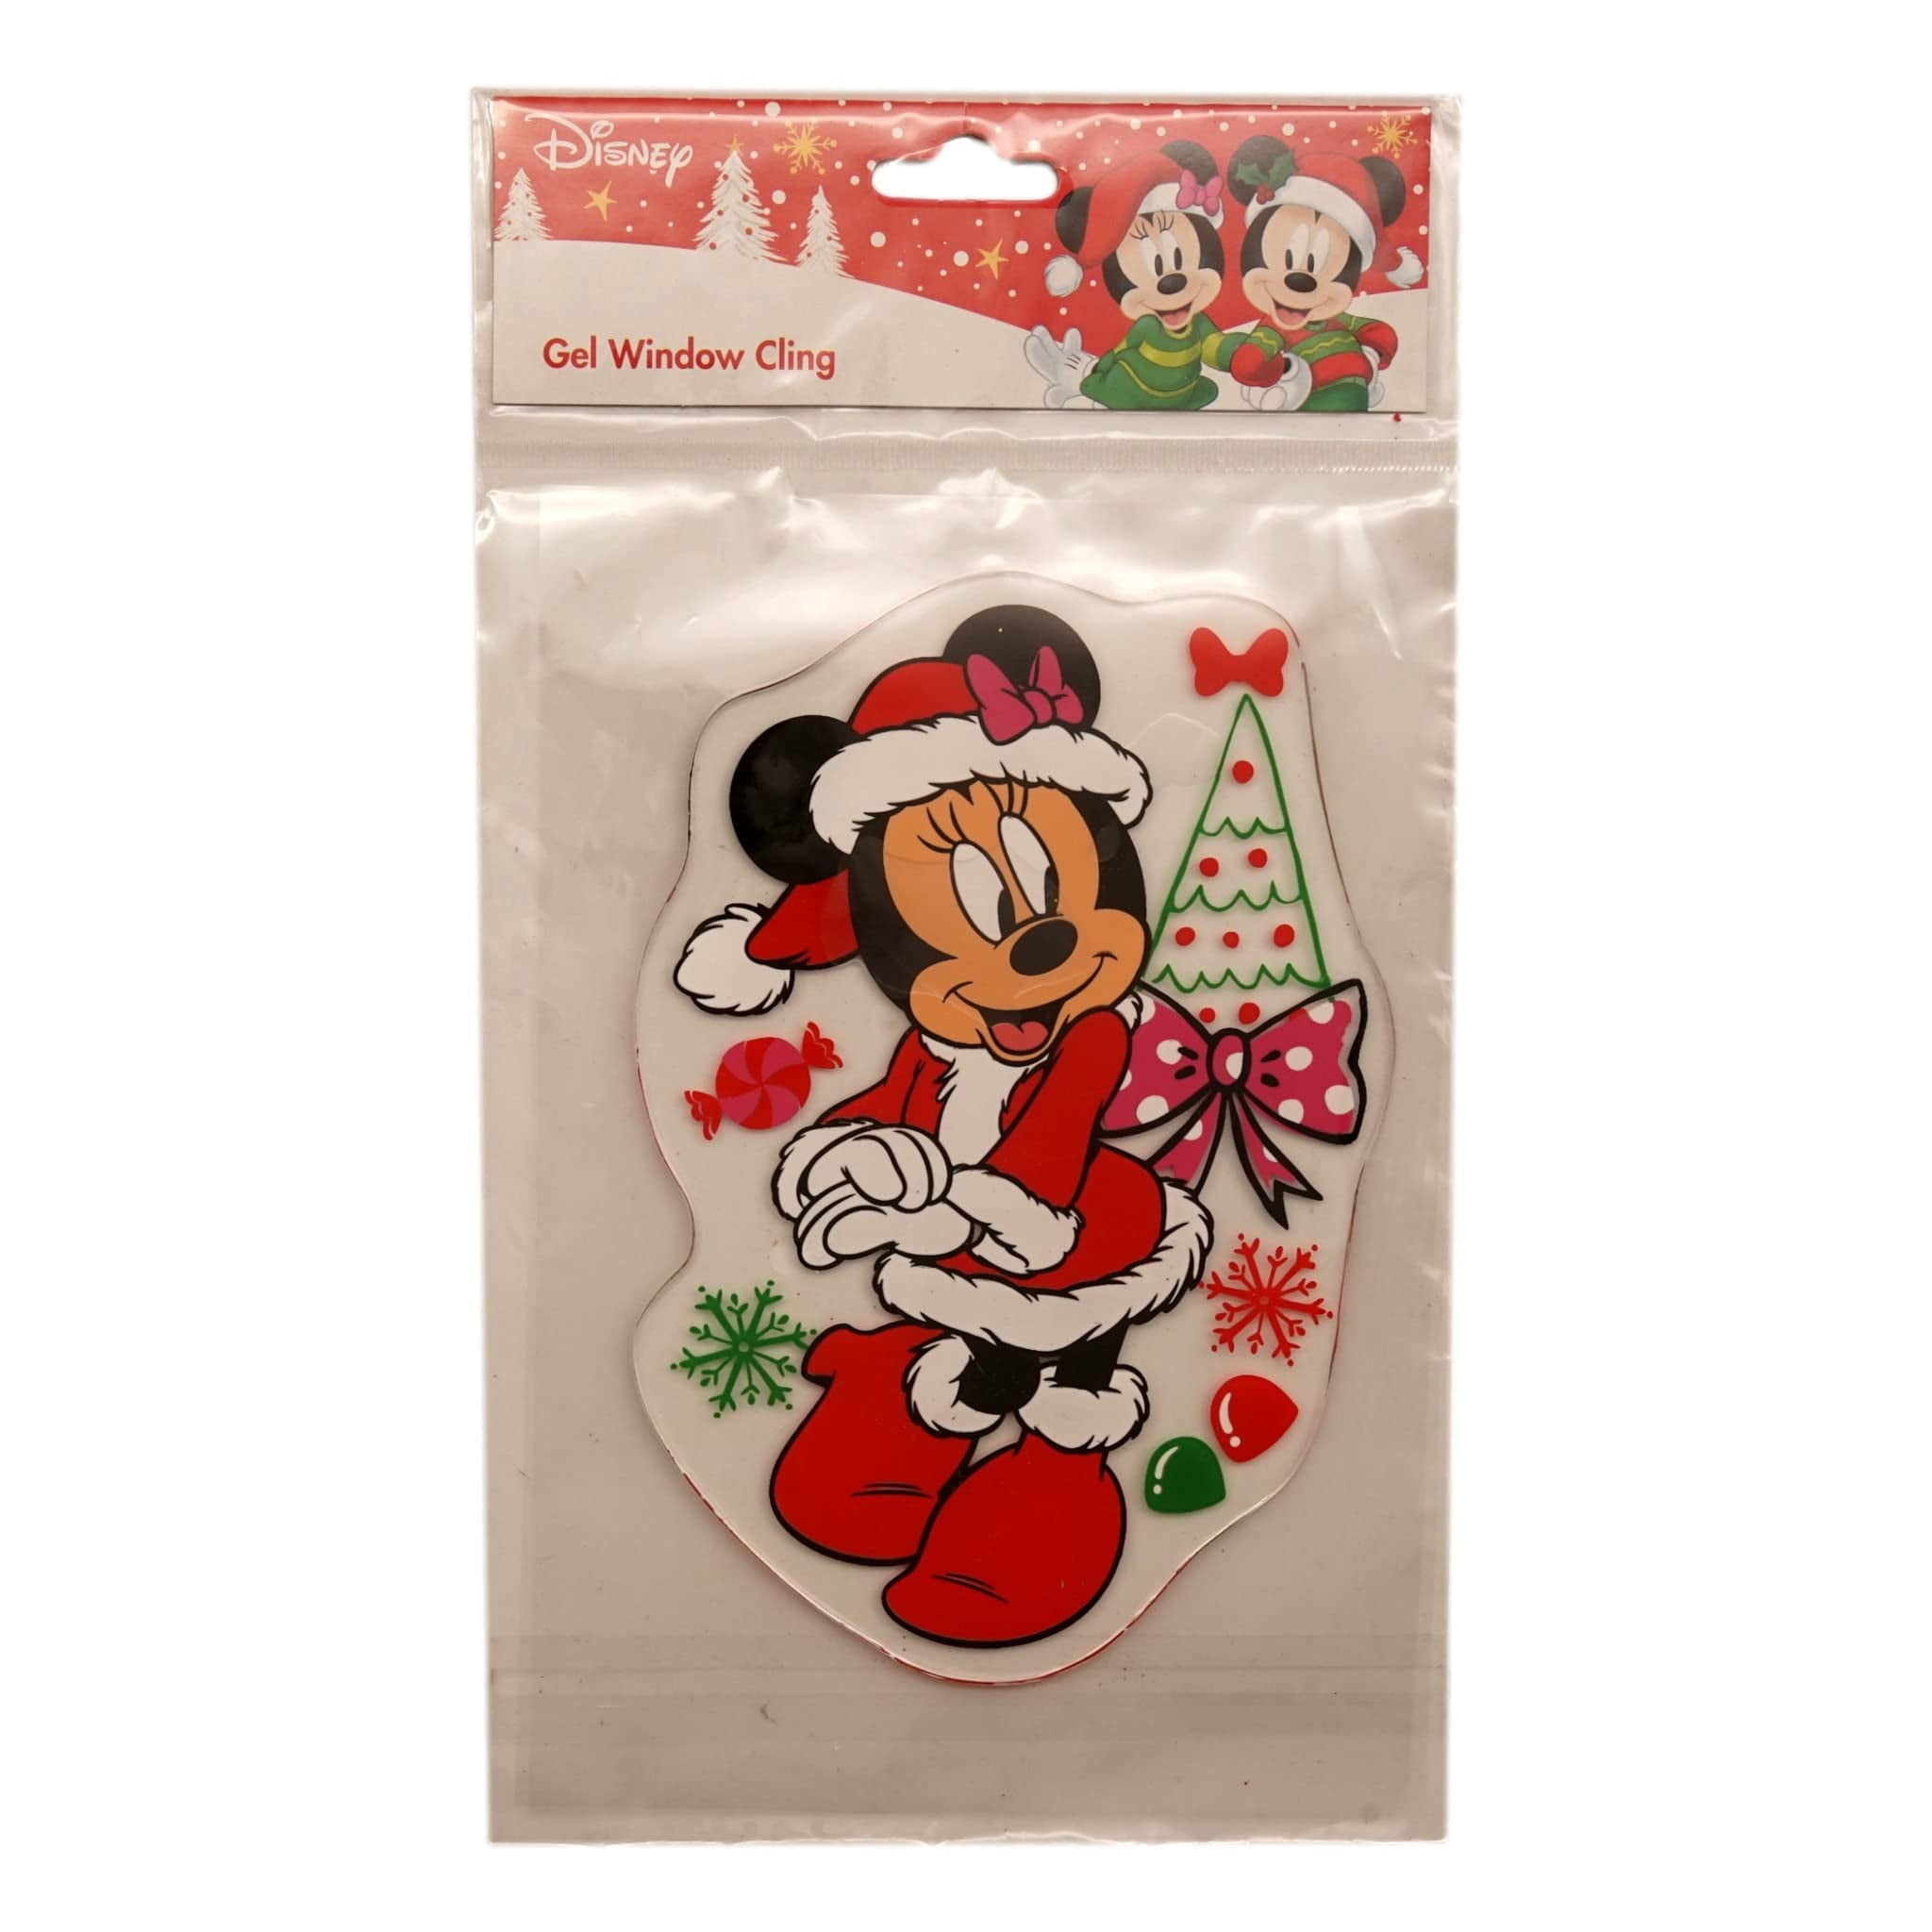 Details about   4ct DISNEY Minnie Mouse Daisy Duck Christmas Gel Clings Windows Licensed 70% OFF 